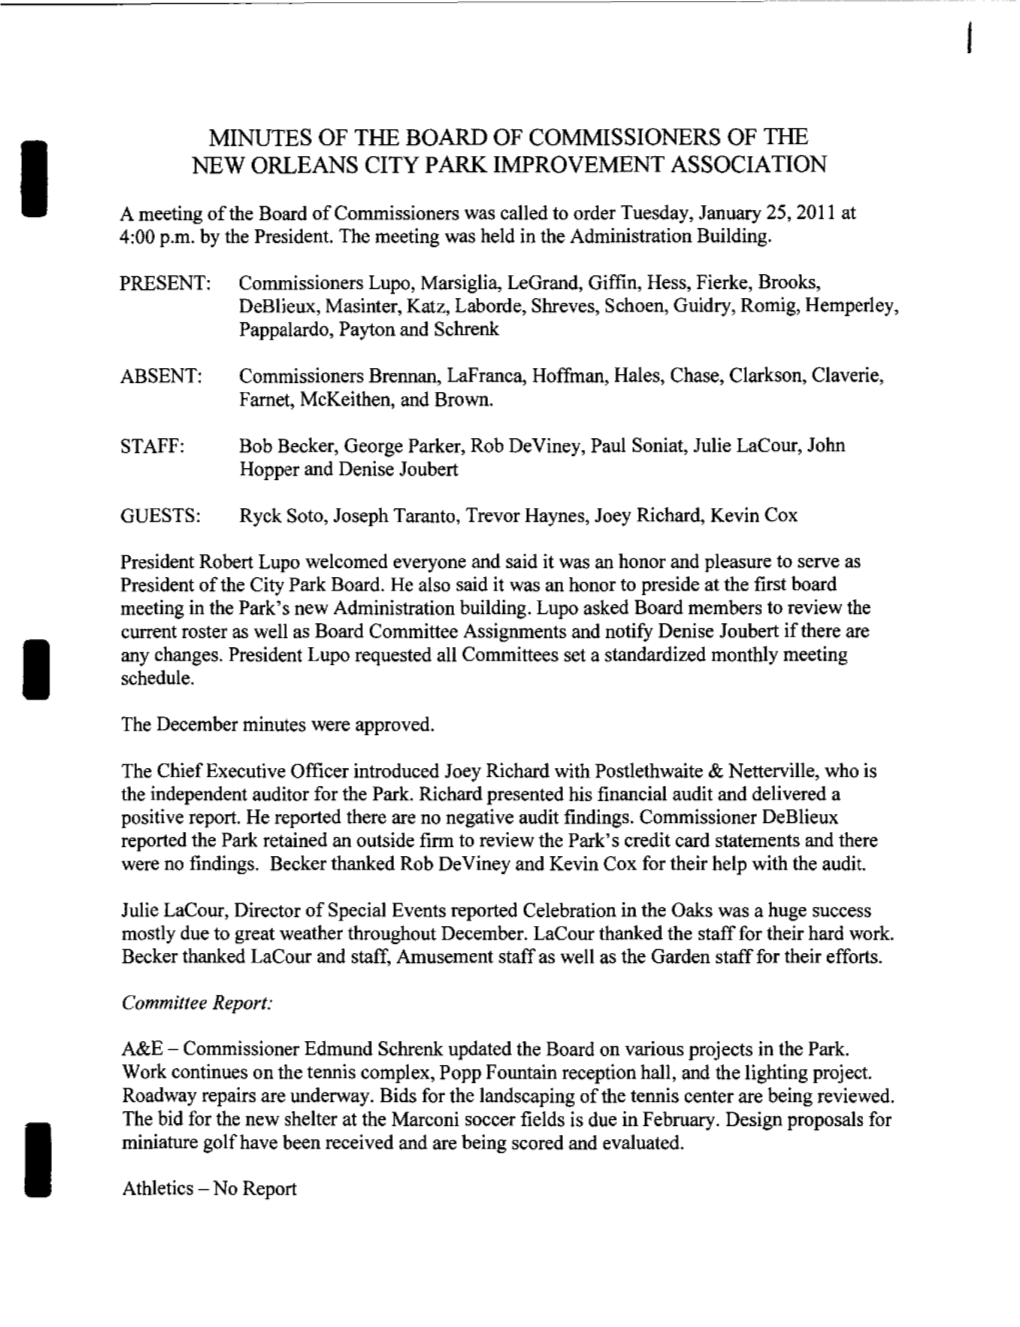 Minutes of the Board of Commissioners of the New Orleans City Park Improvement Association